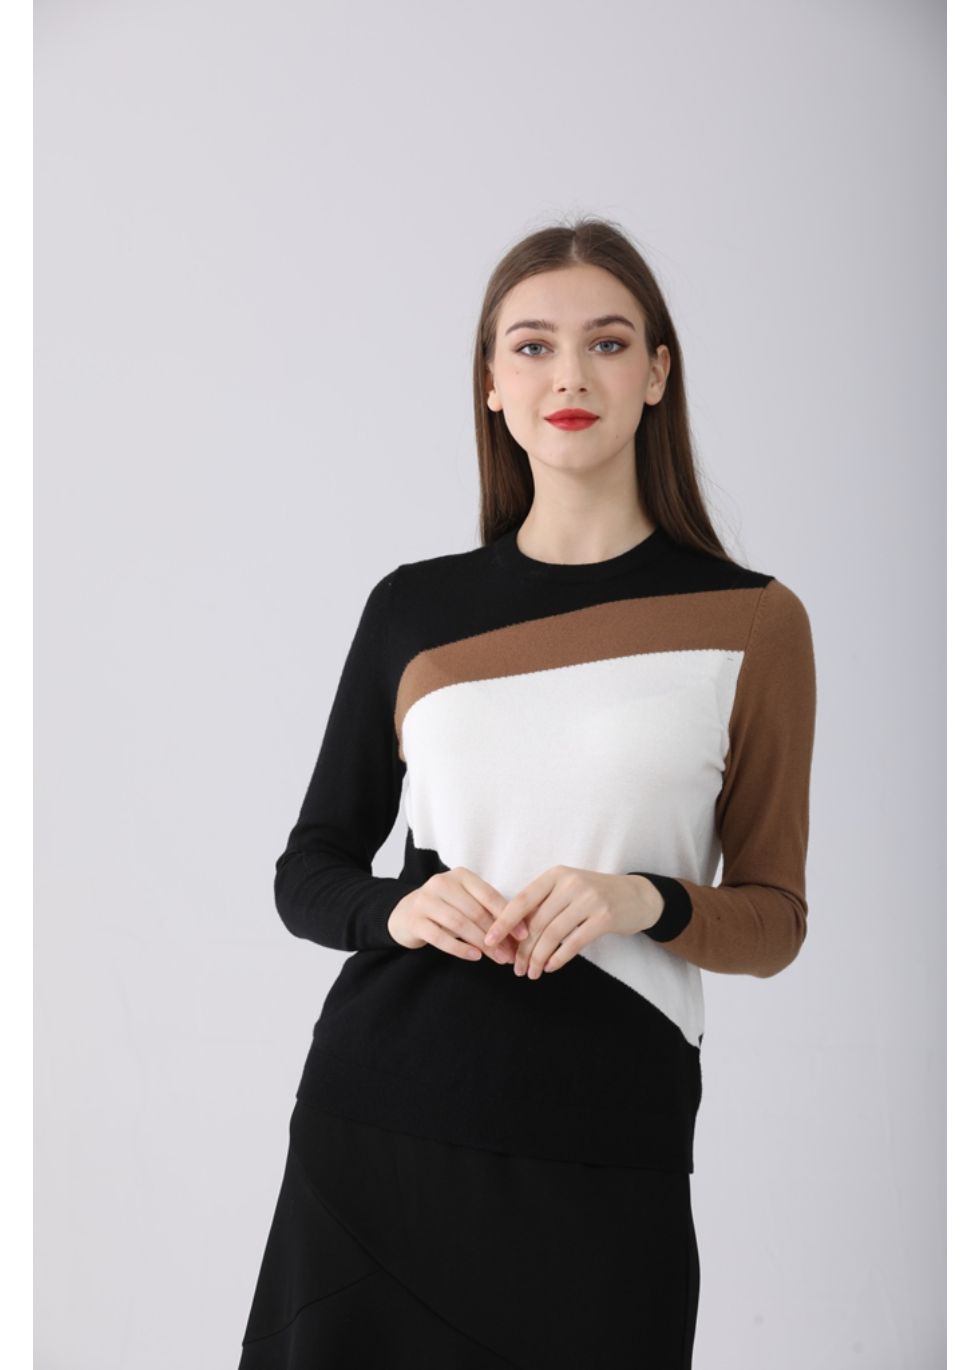 Brown and White Block Sweater - seilerlanguageservices